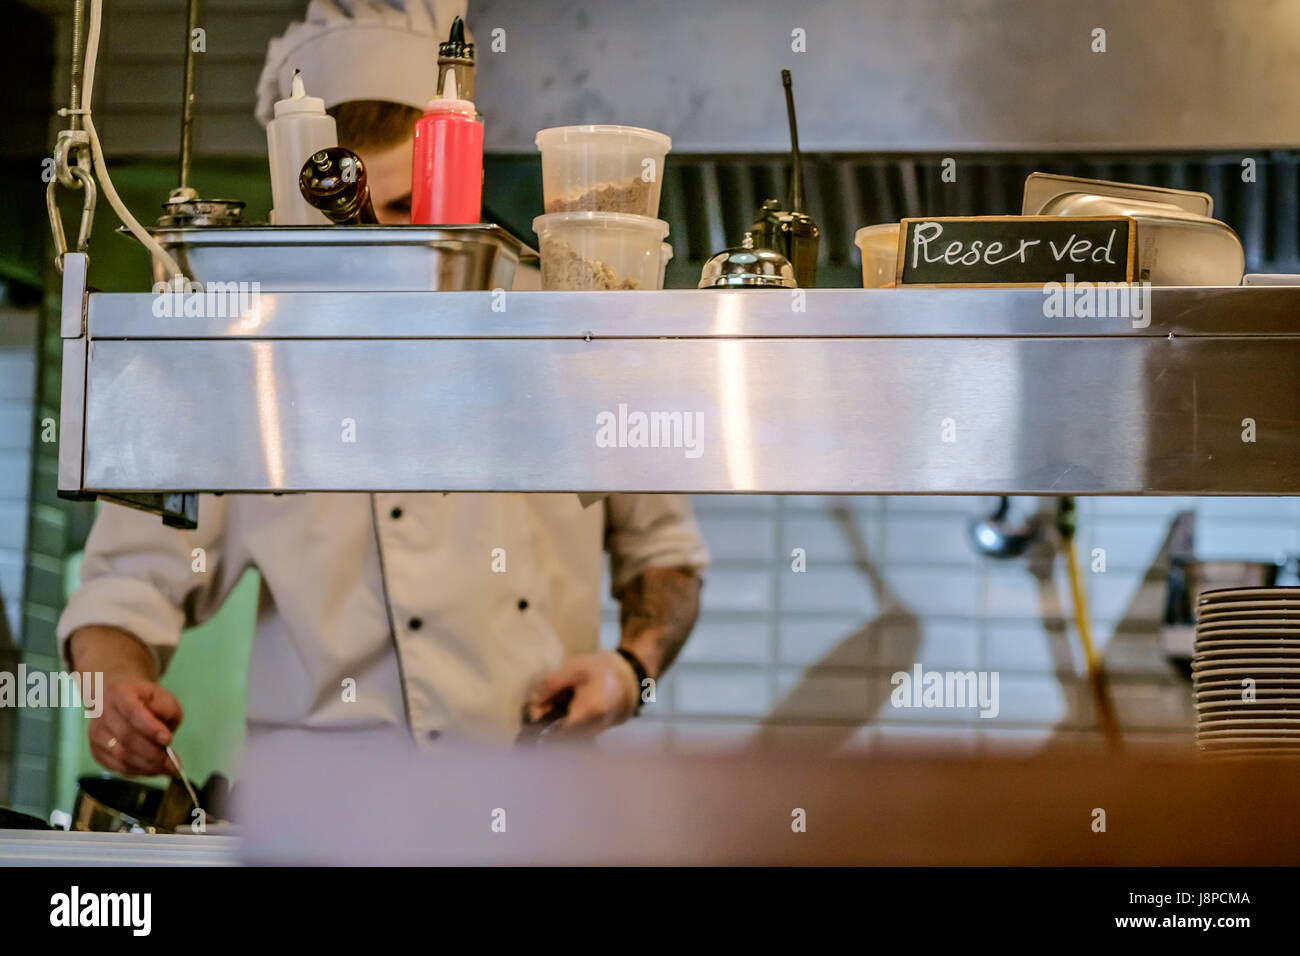 restaurant kitchen close up with Reserved table and  blurred chief cook on the background. Stock Photo